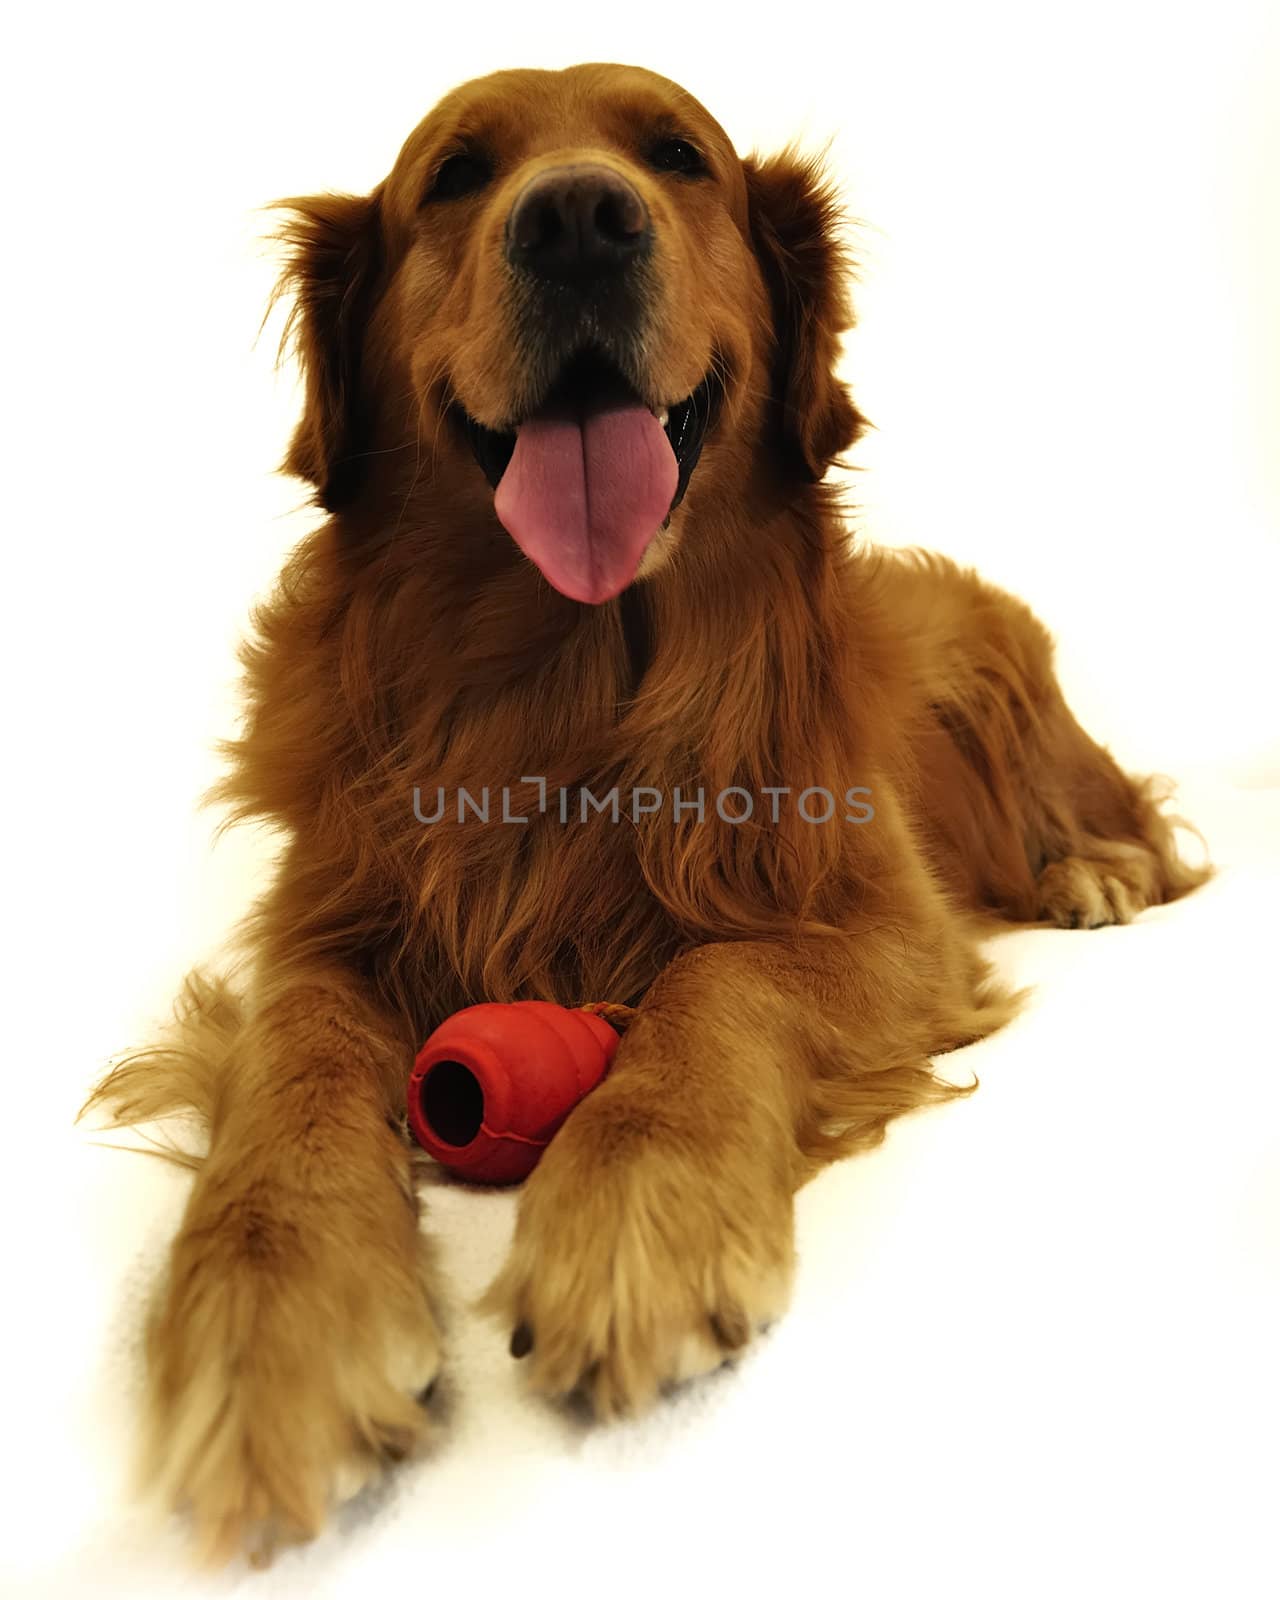 Golden retriever dog very expressive face. Lying with red toy, f by jmffotos